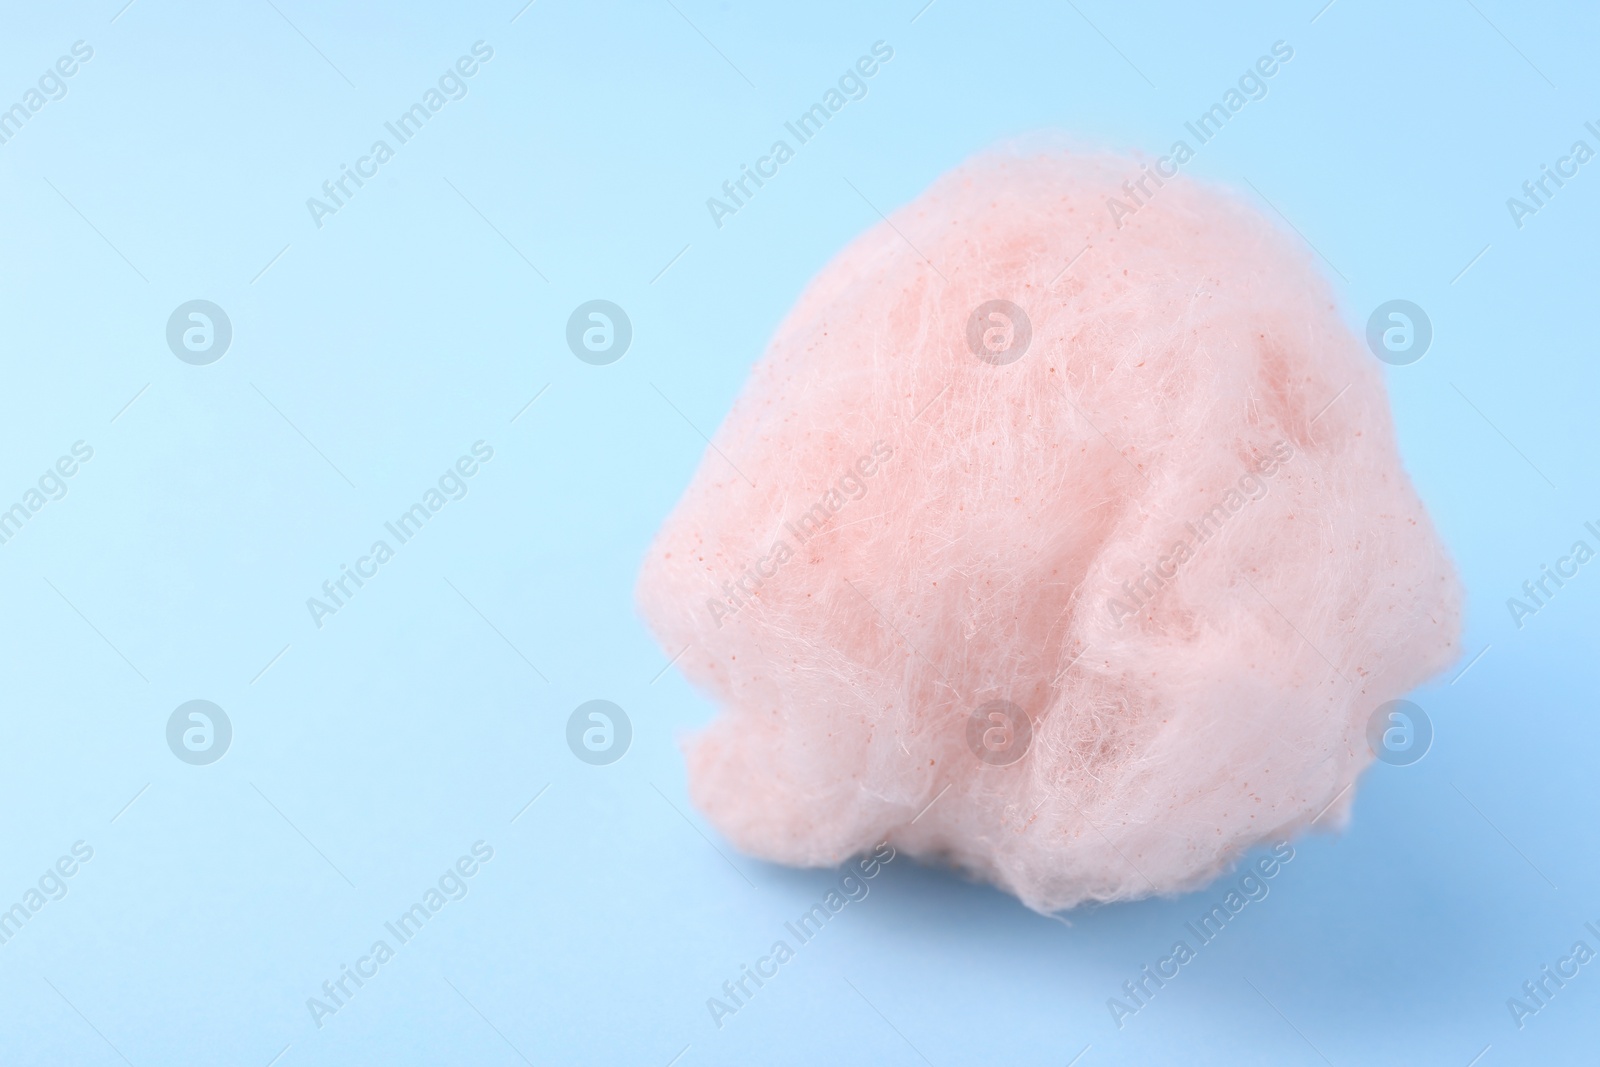 Photo of One sweet cotton candy on light blue background. Space for text